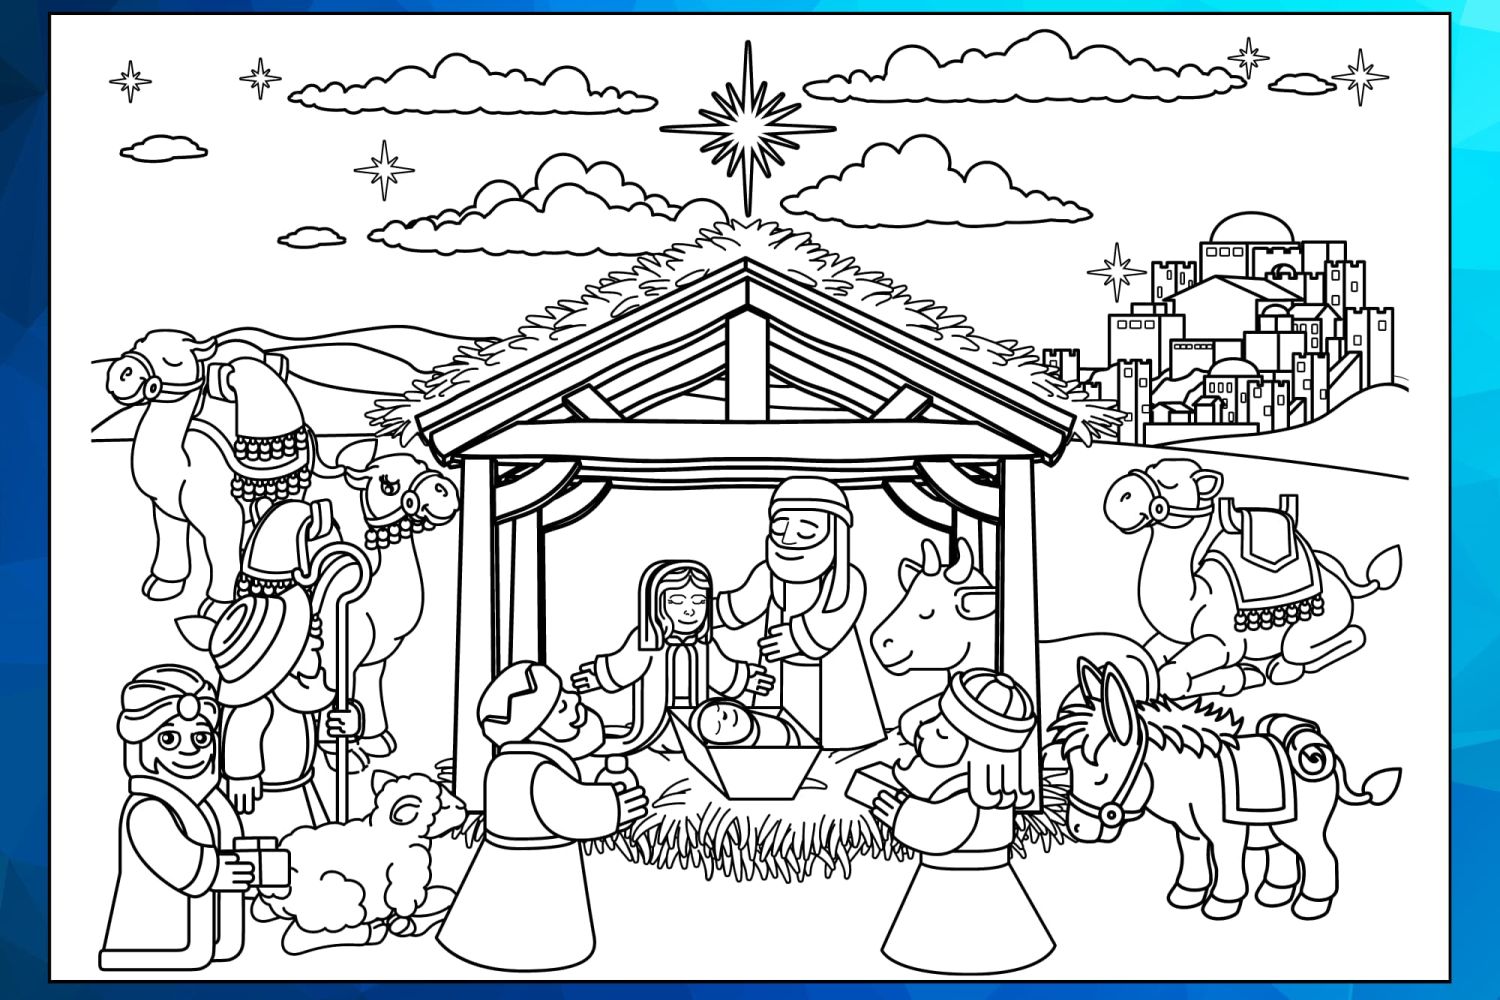 Nativity%20Scene%20Christmas%20Coloring%20Pages%20Worksheet%201-175b3fa4 Shelter